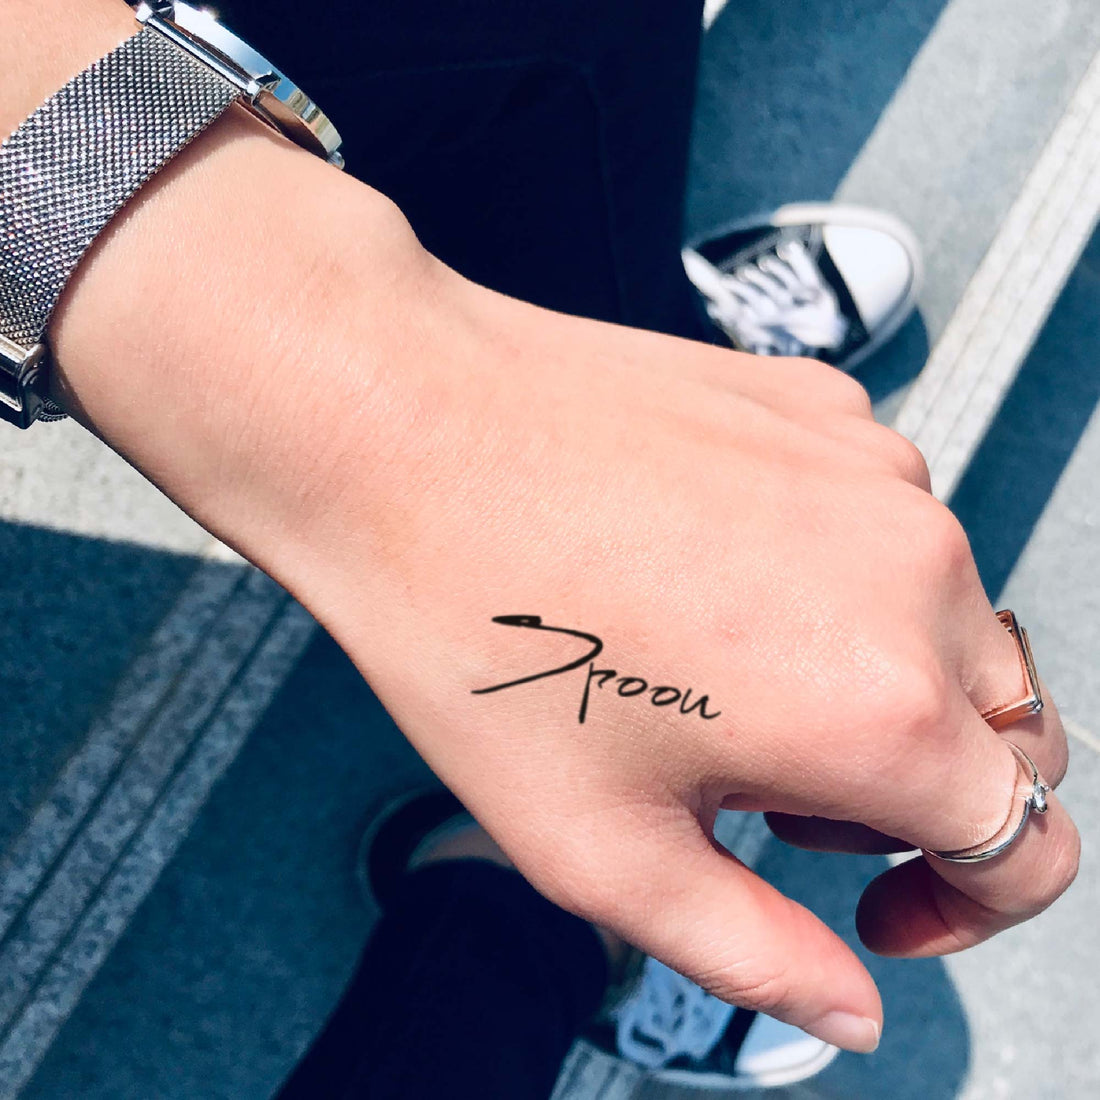 Spoon custom temporary tattoo sticker design idea inspiration meanings removal arm wrist hand words font name signature calligraphy lyrics tour concert outfits merch accessory gift souvenir costumes wear dress up code